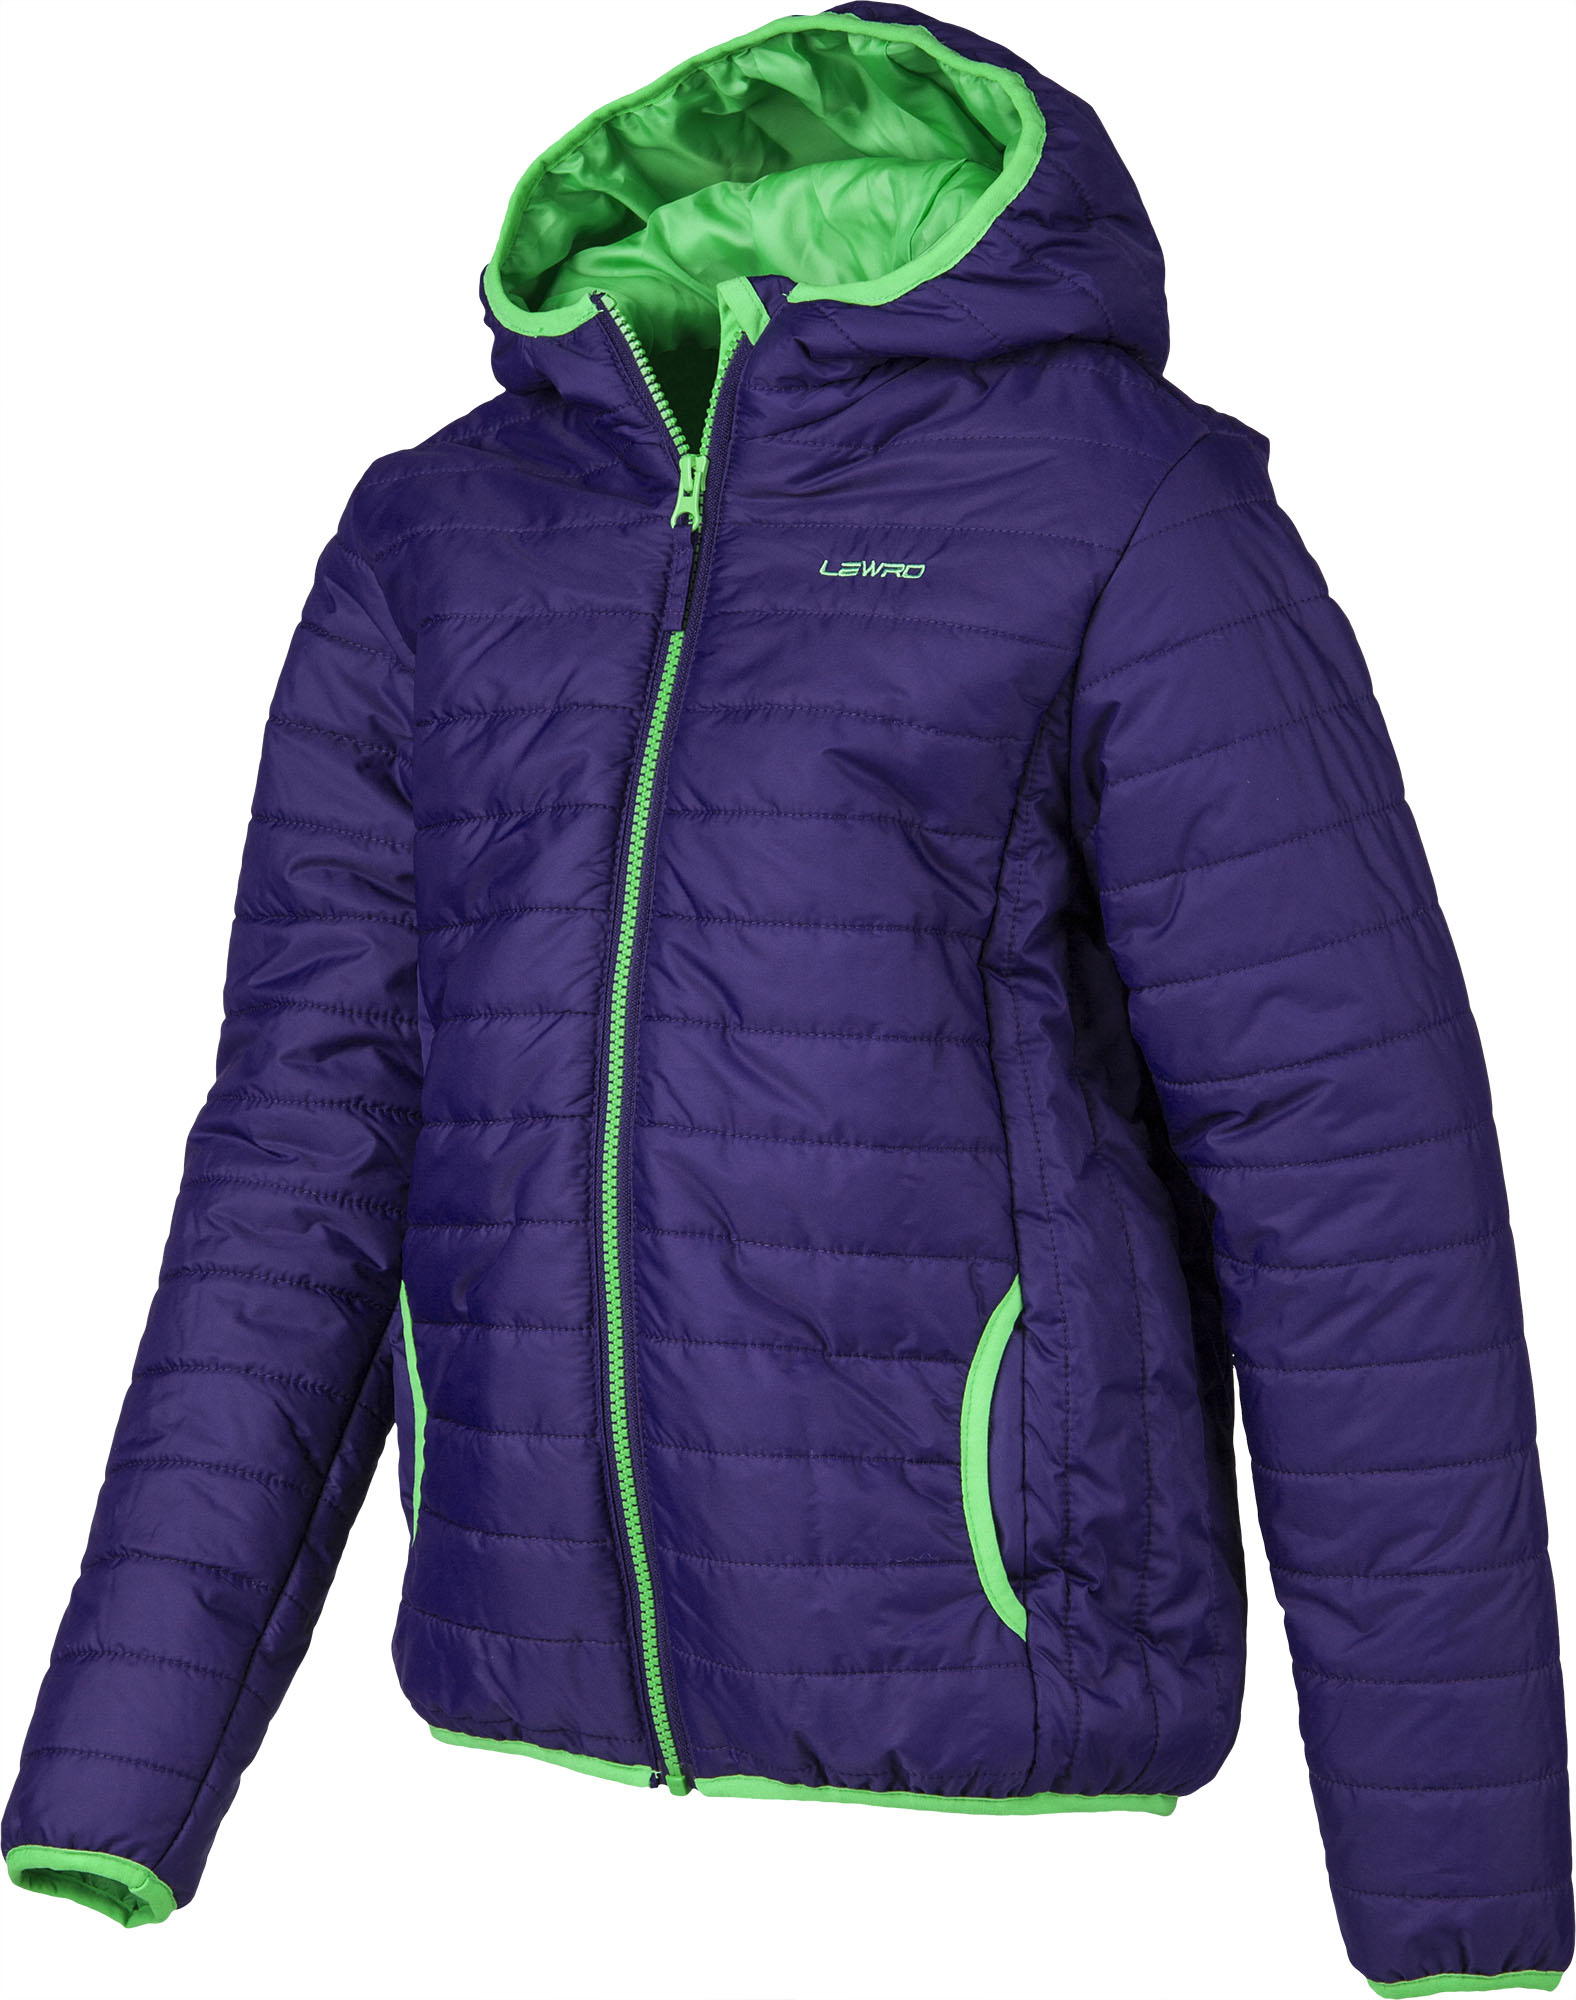 Kids’ quilted jacket